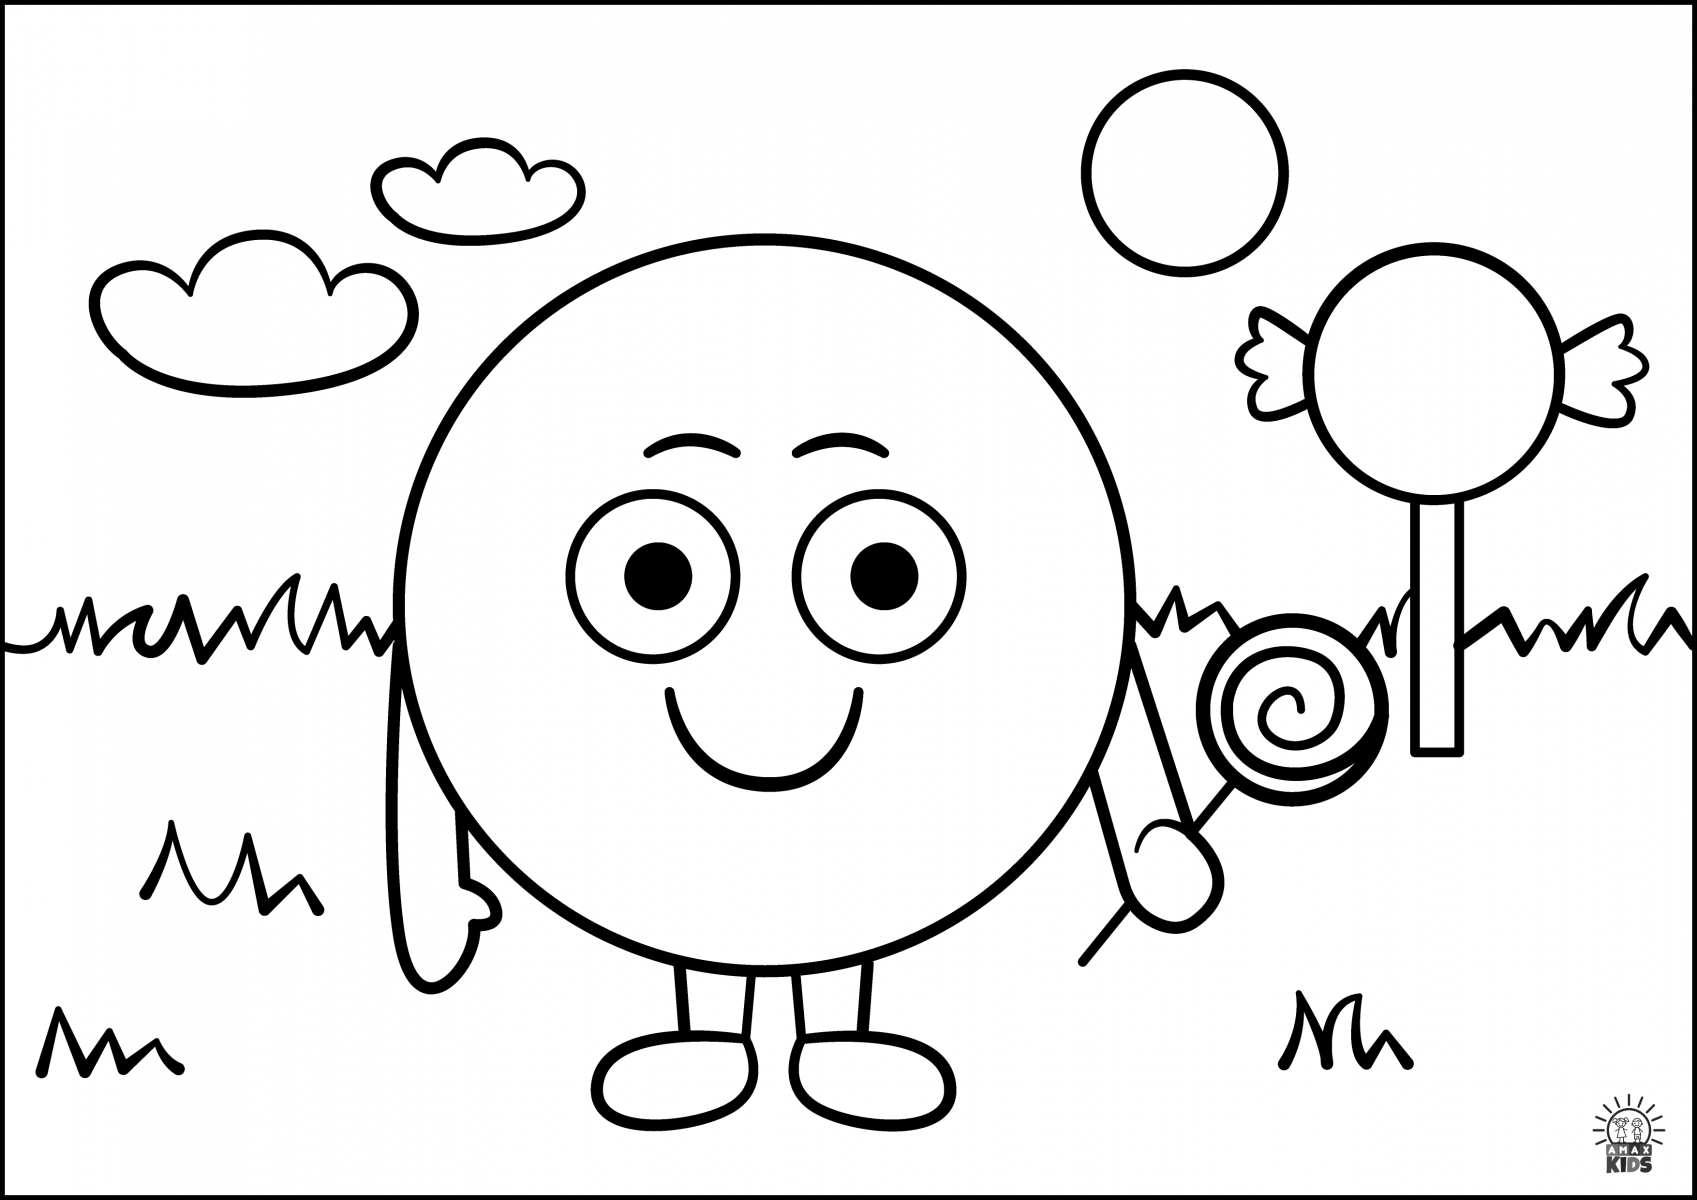 coloring-pages-for-kids-shapes-amax-kids